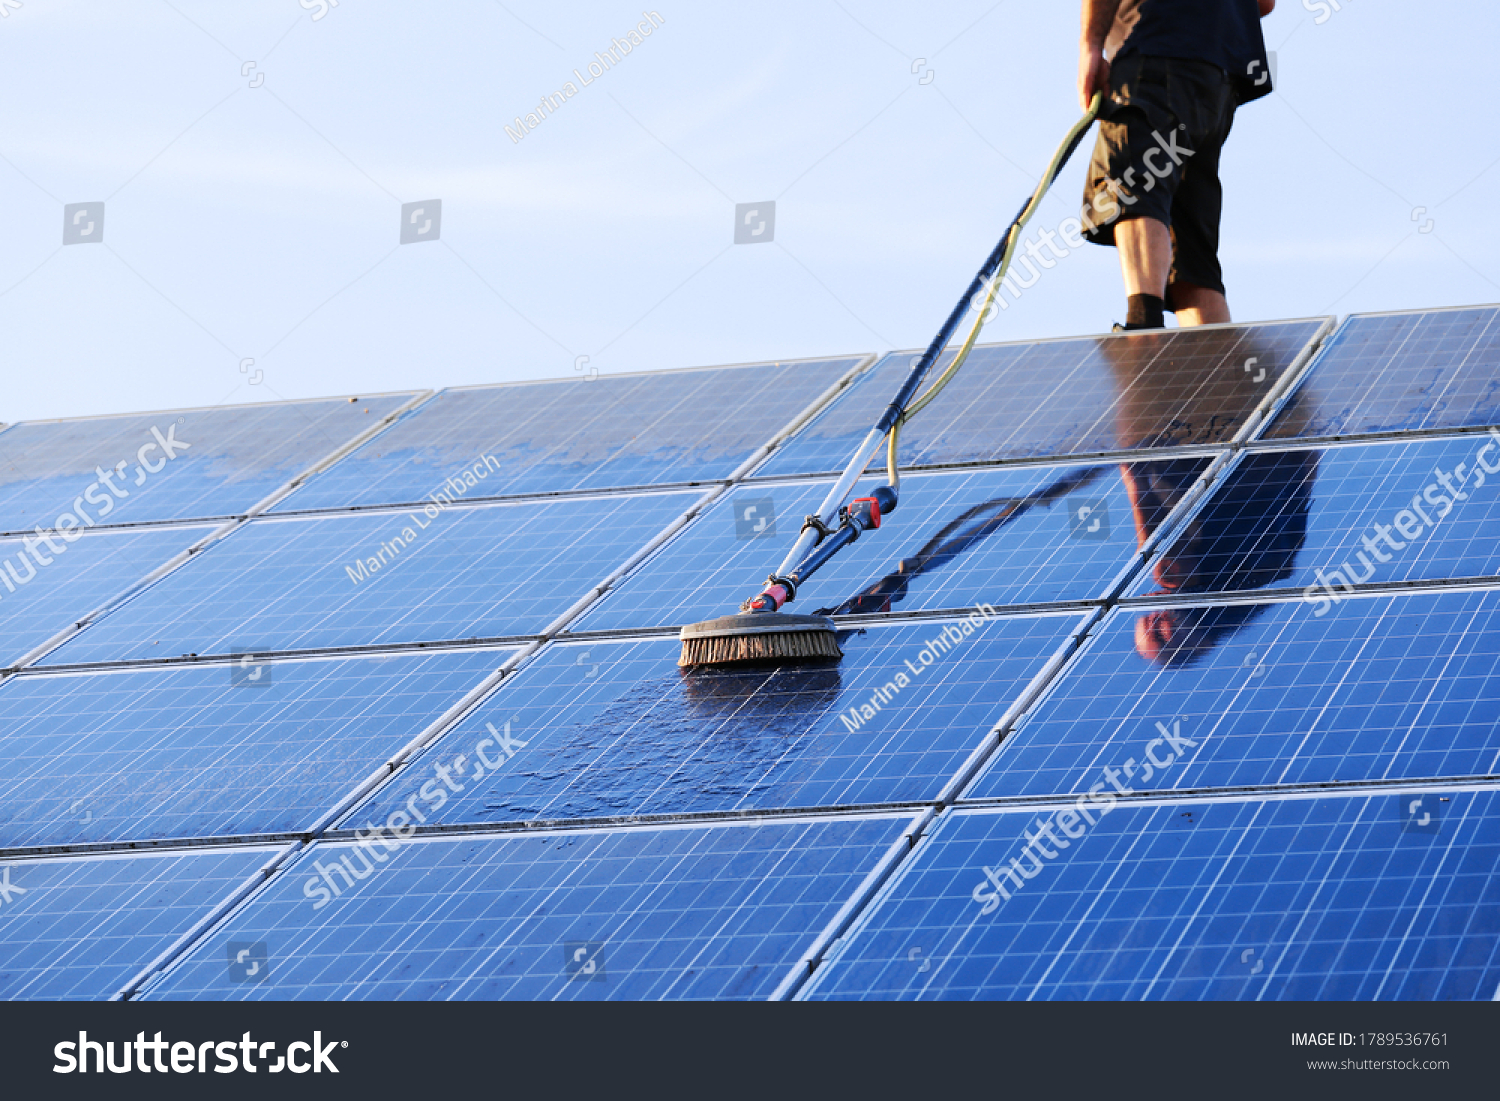 Cleaning solar panels with brush and water #1789536761